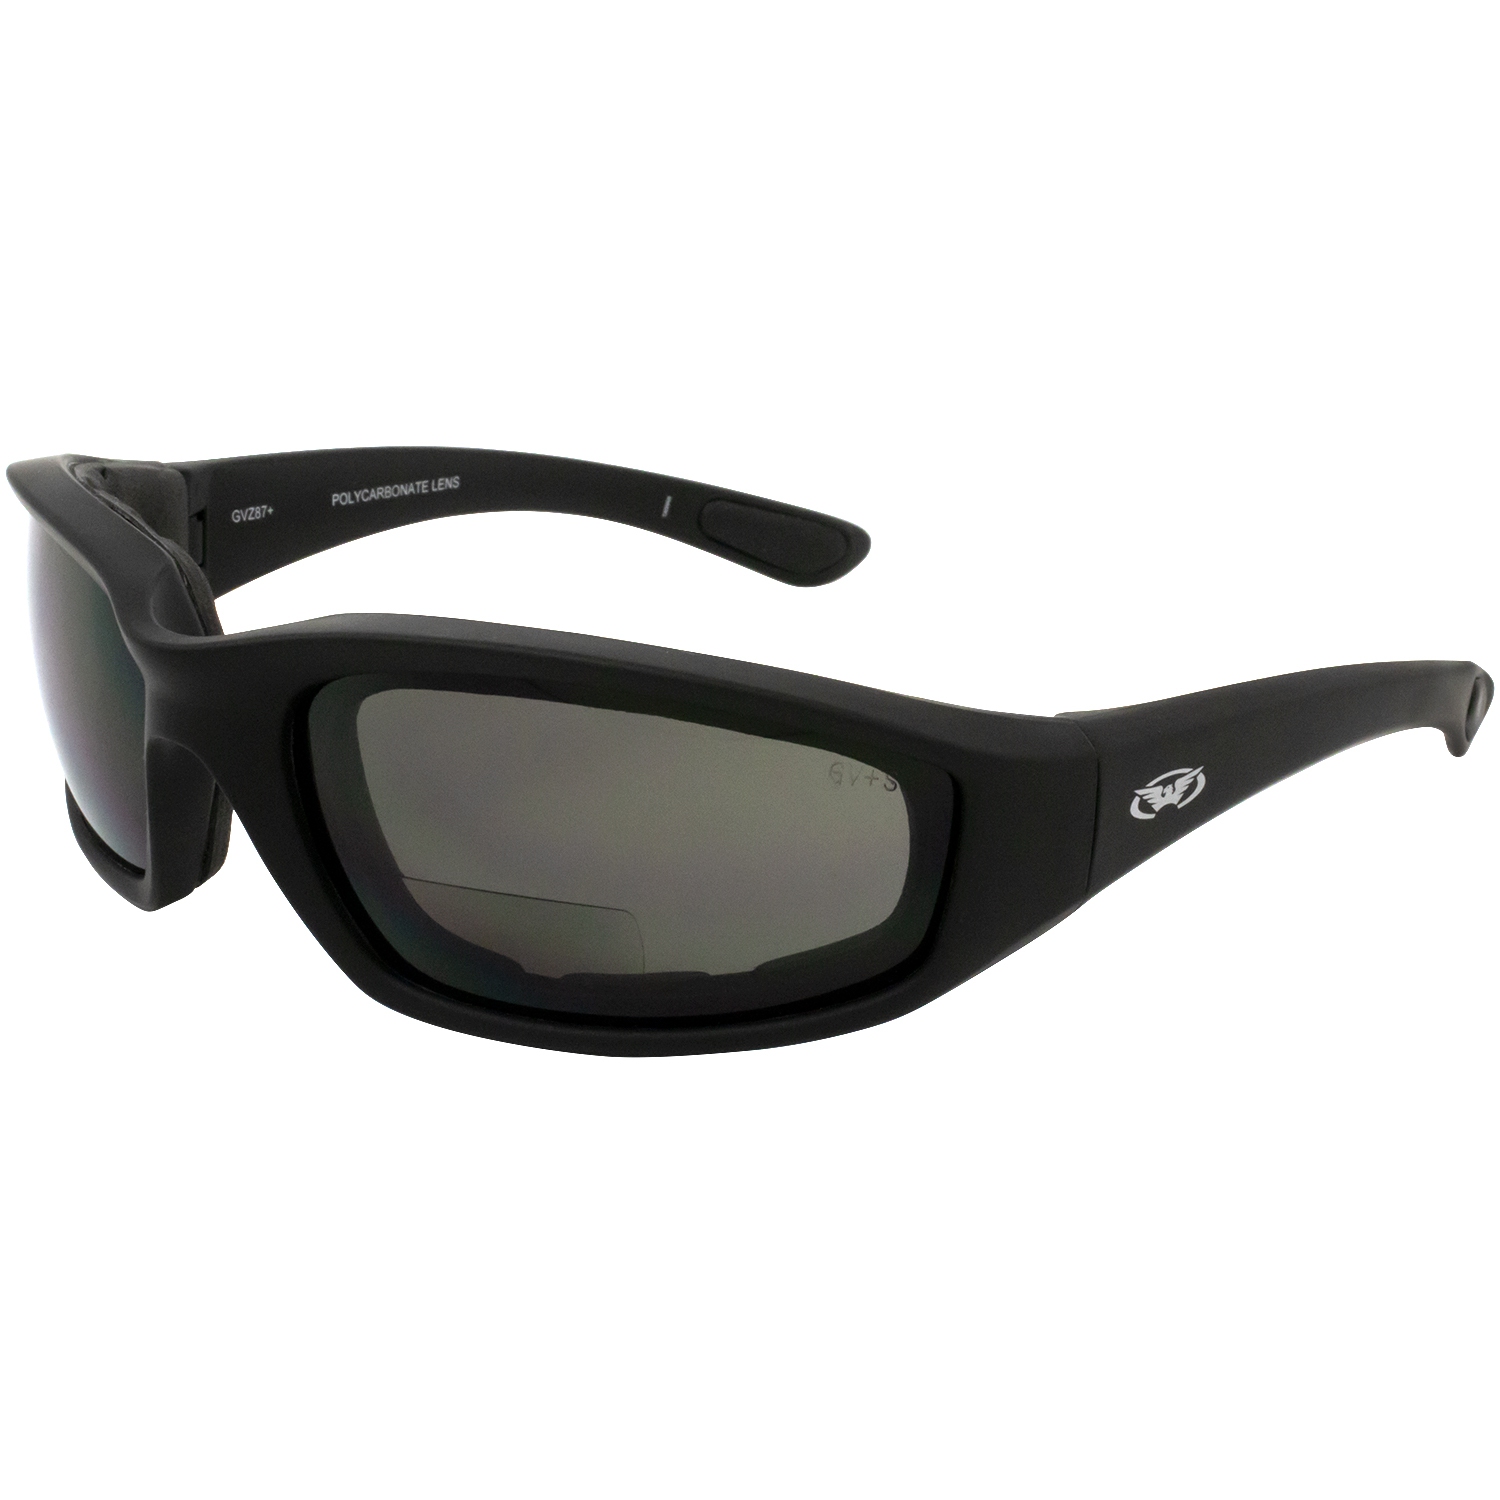 GLOBAL VISION Eyewear Cool Breeze Bifocal 2.0 Safety Sunglasses With Frame & Smoke Lens In Black